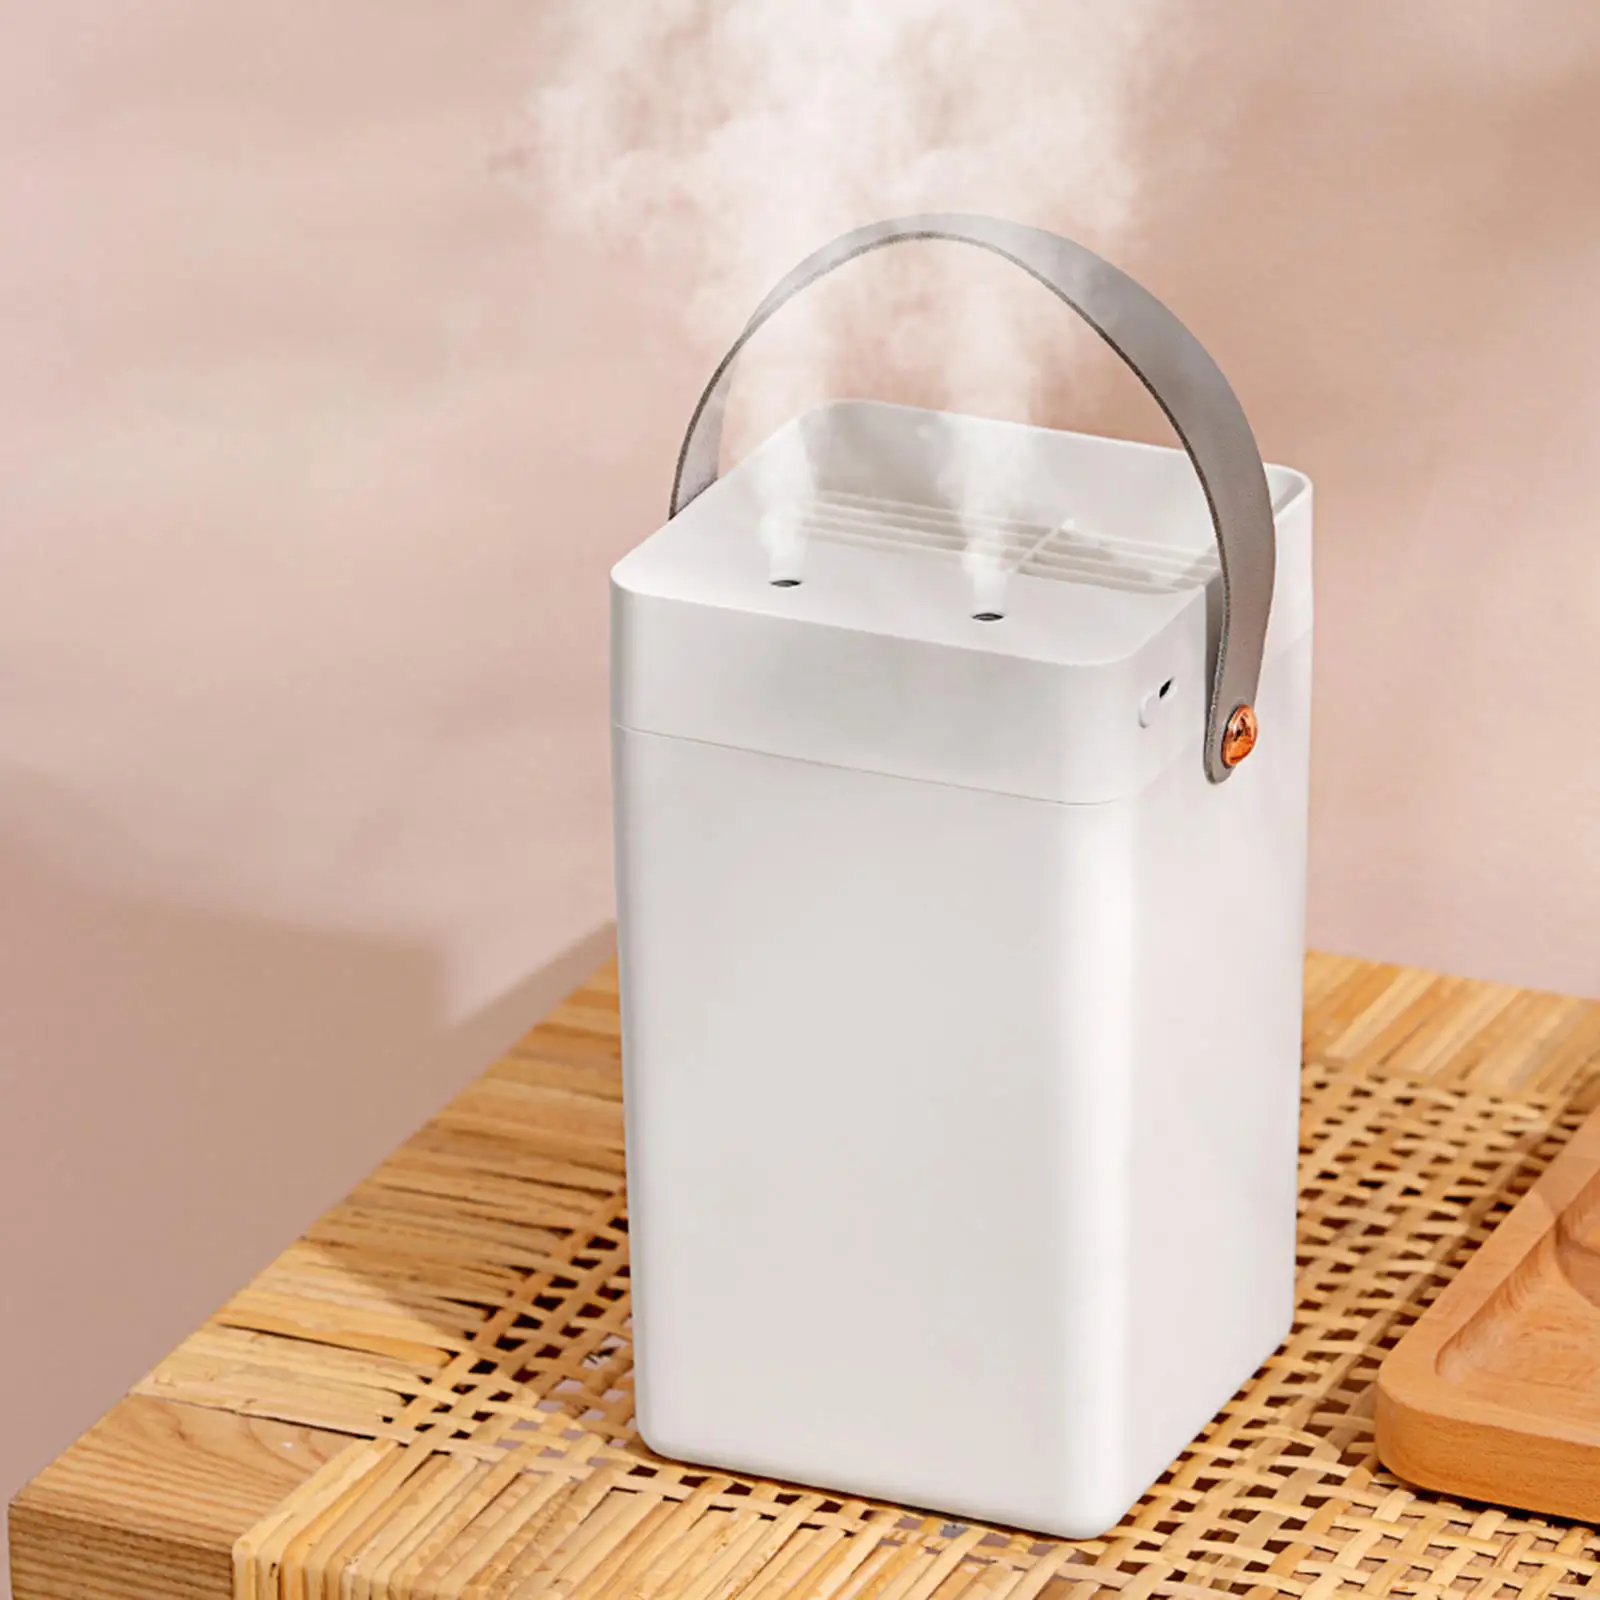 Quiet Double Nozzles Air Humidifier 3000ml 10 Hours Portable Nebulizing Electric Cool Mist XL for Big Room Huge Area Office Home